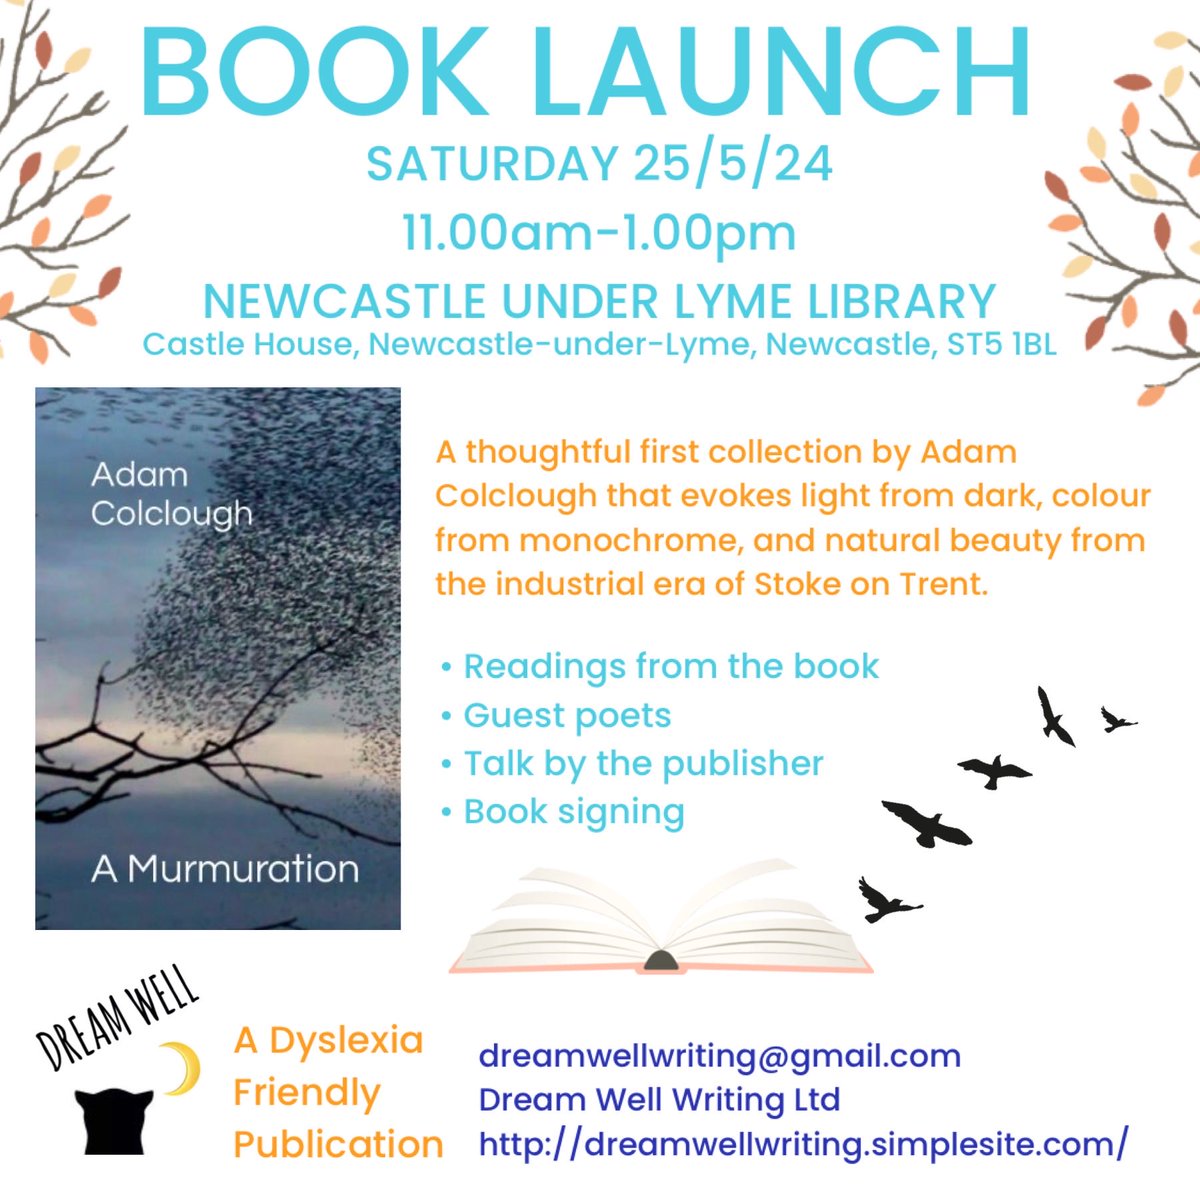 Dream Well is excited to announce publication of A Murmuration by Adam Colclough 25/5/24 11.00 am-1.00pm ⁦@StaffsLibraries⁩ Newcastle Under Lyme Library. All welcome!
#staffordshirelibraries #DyslexiaFriendly #poetry #smallpress #dreamwellwriting #stokeontrent #poetrybooks